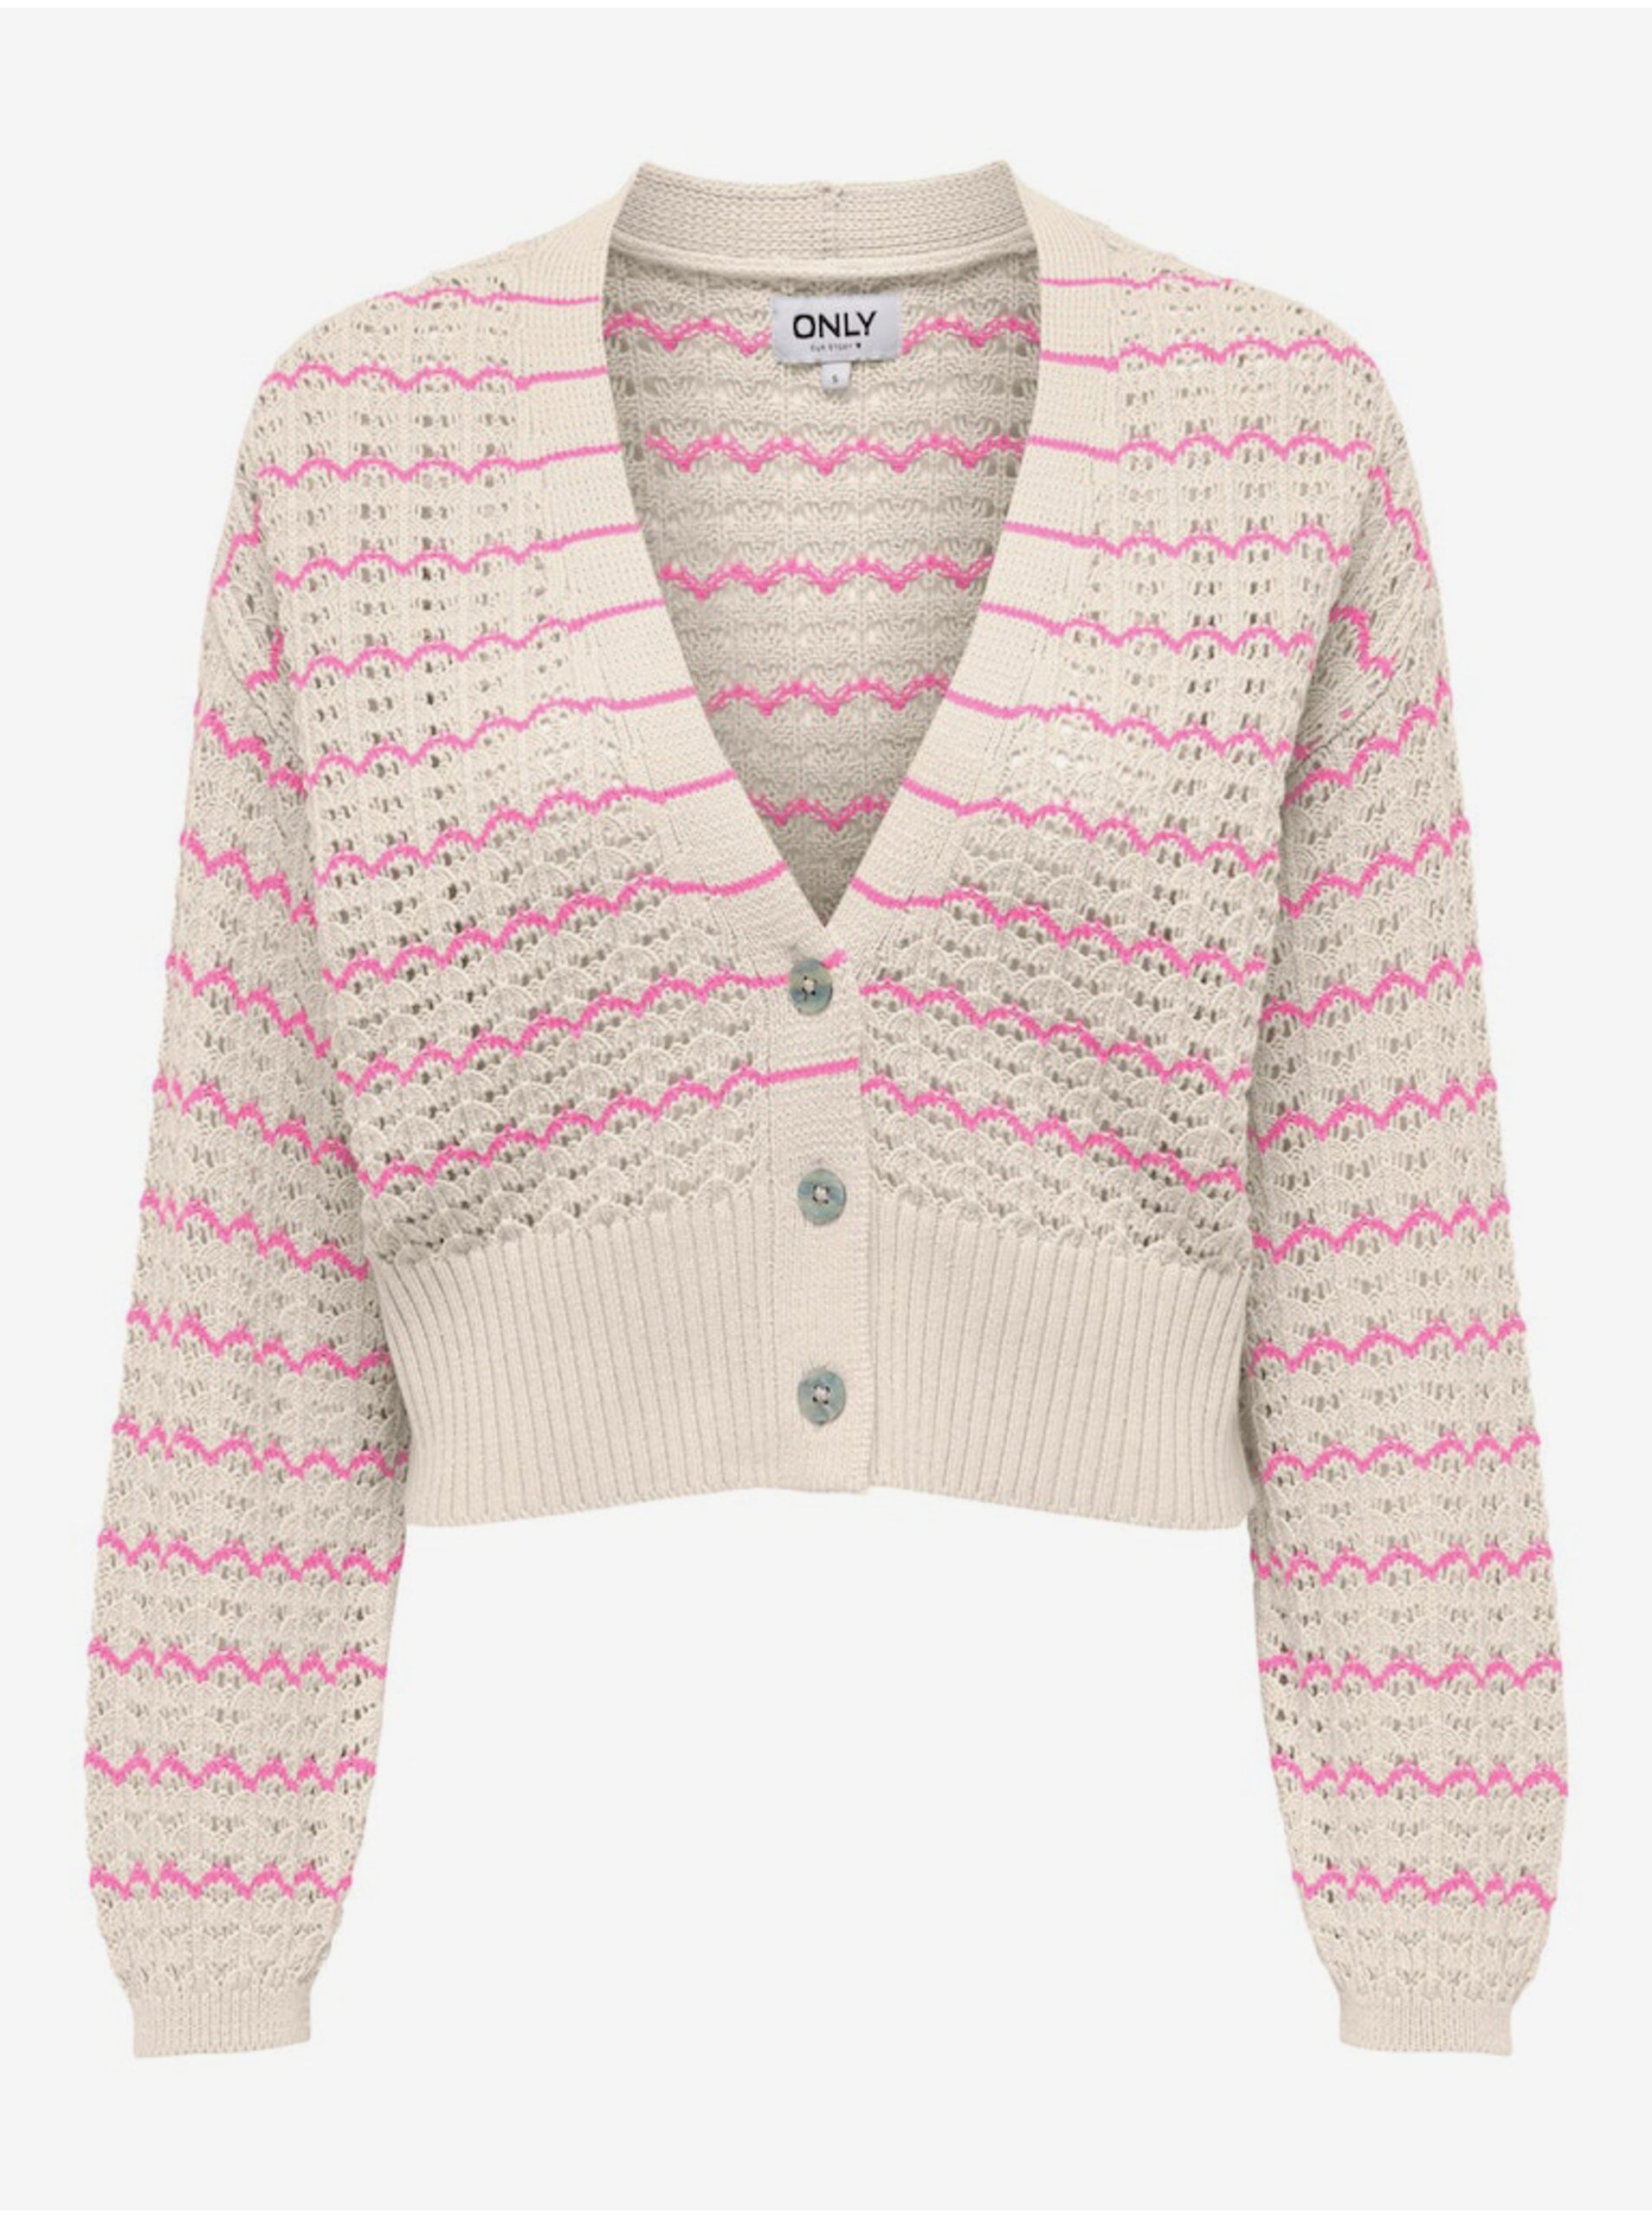 Pink and beige women's striped cardigan ONLY Asa - Women's